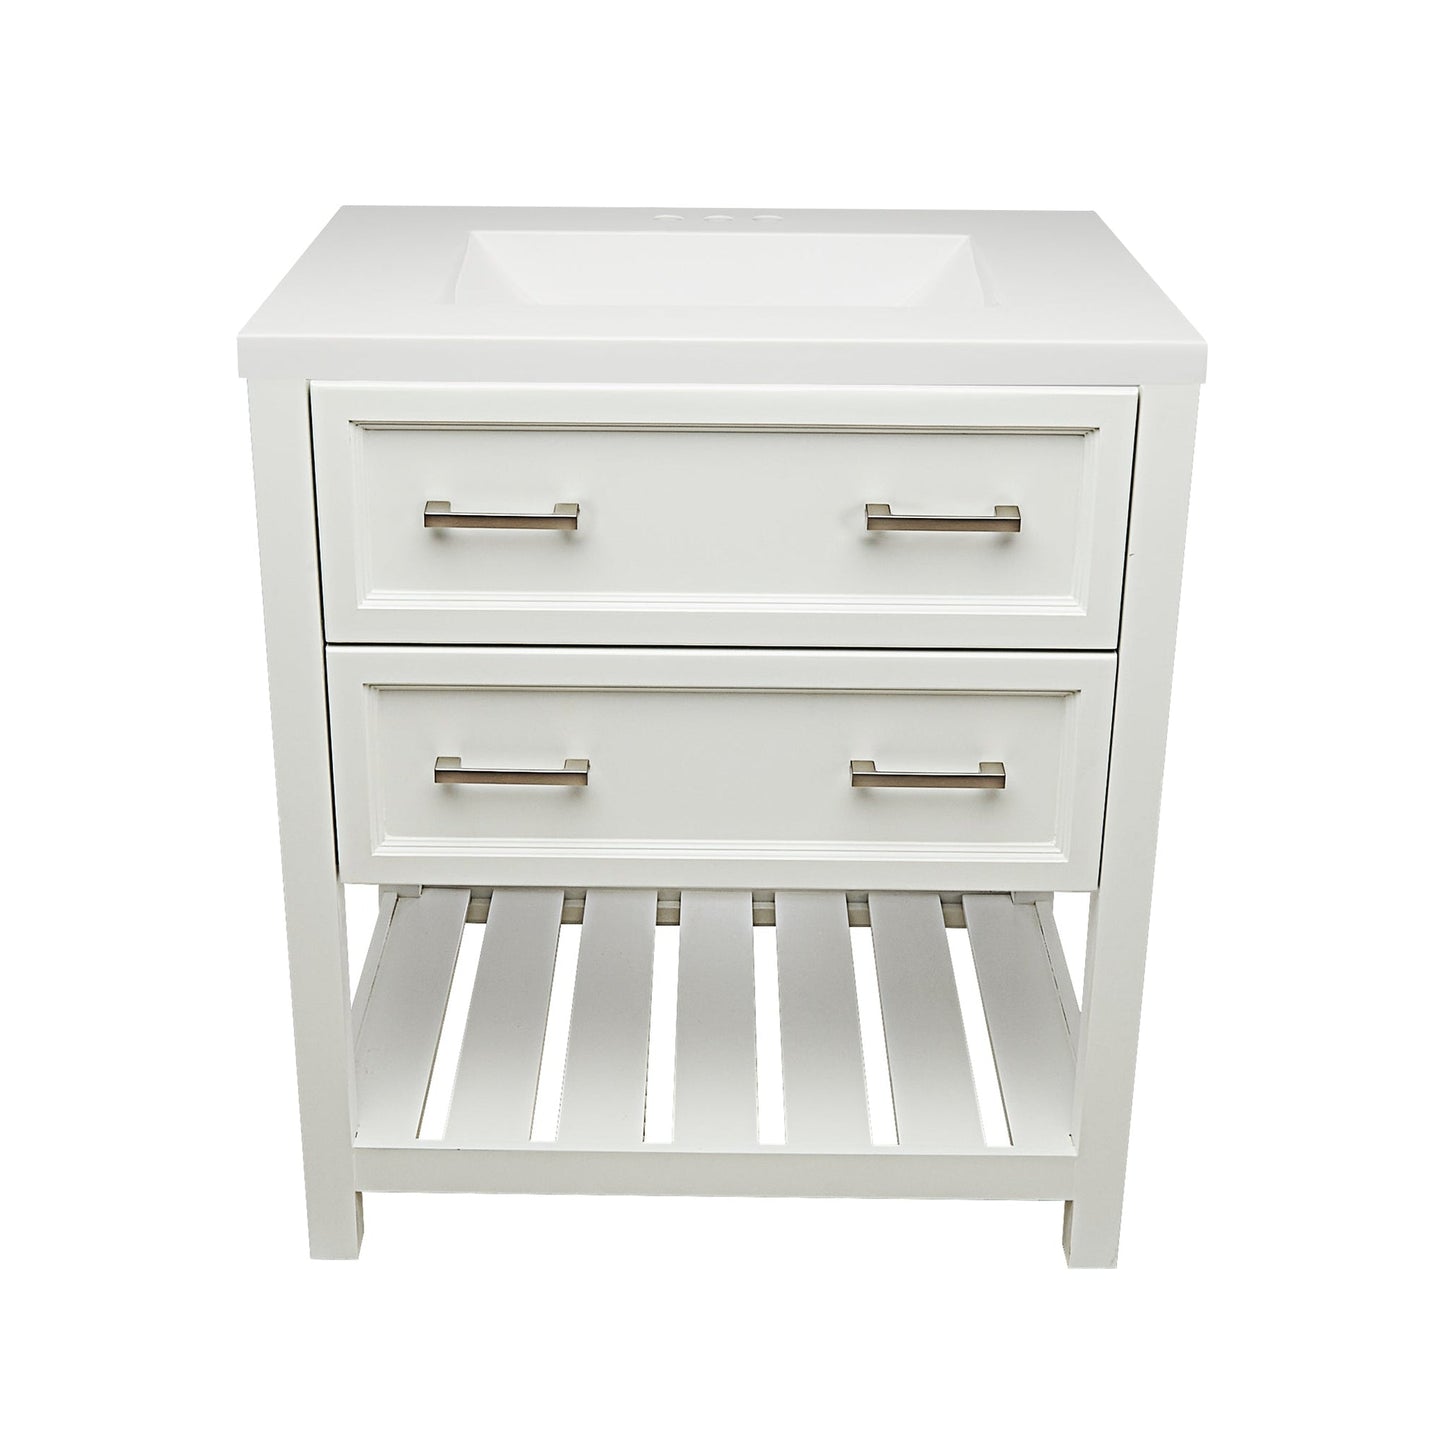 Ella's Bubbles Tremblant 31" White Bathroom Vanity With White Cultured Marble Top and Sink